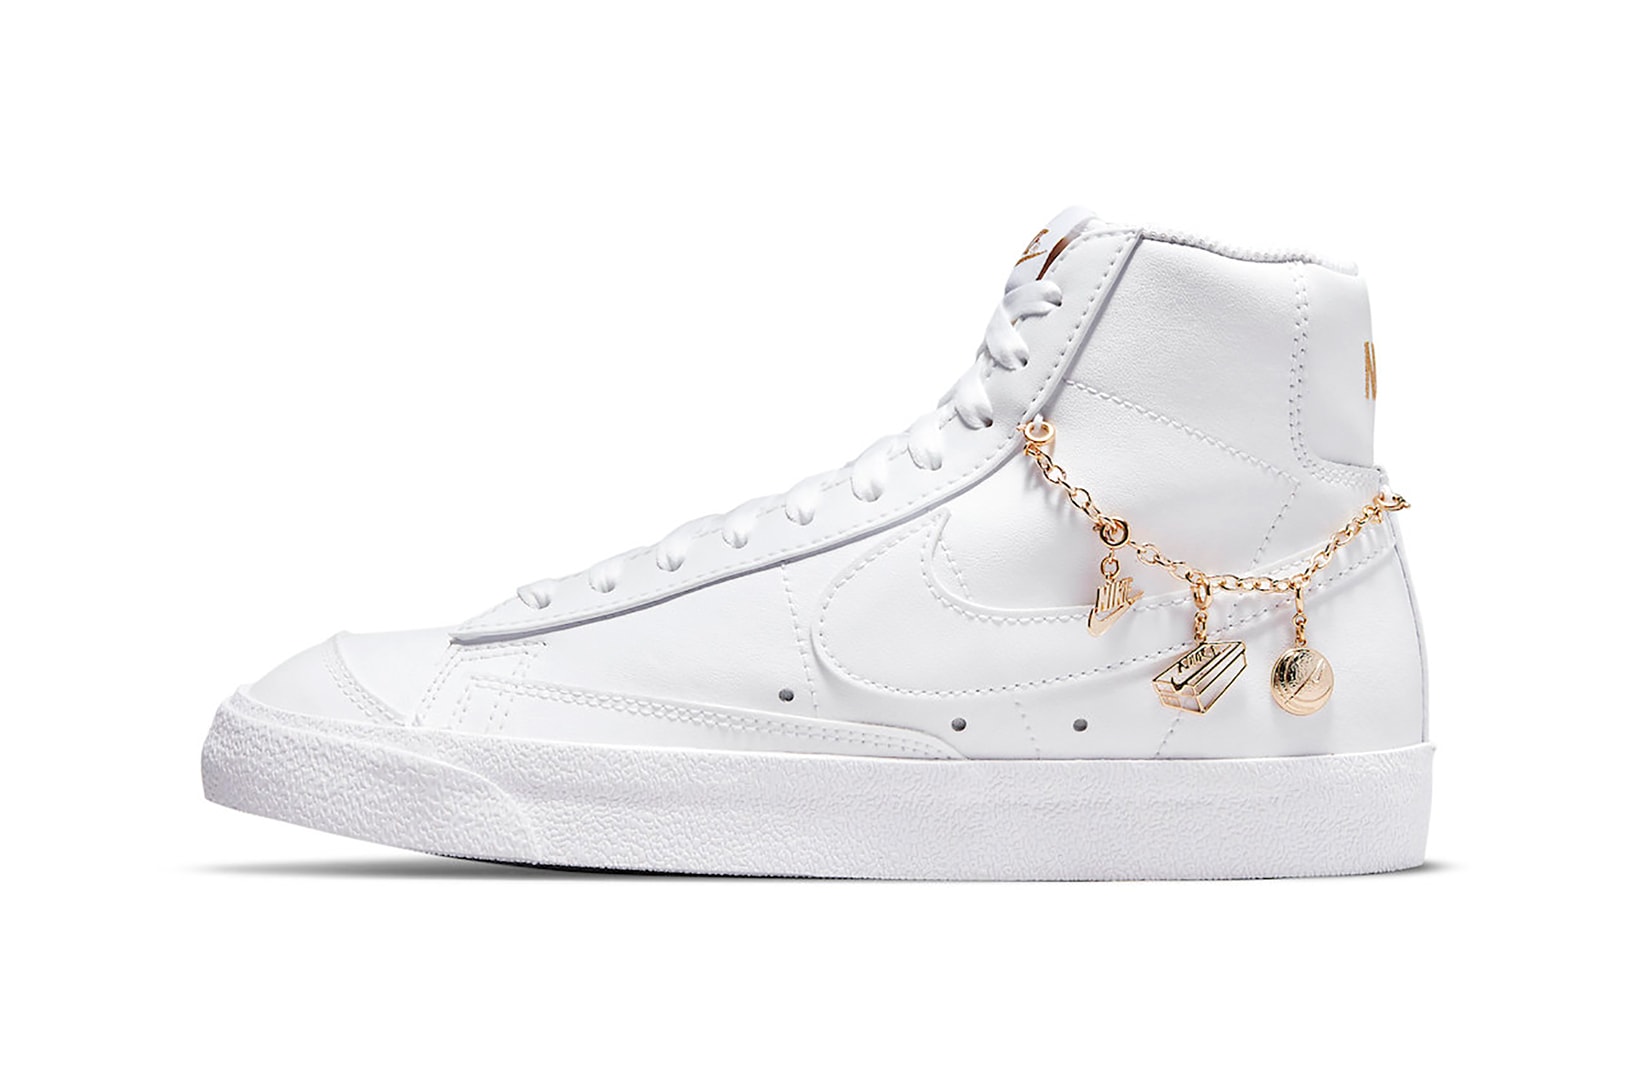 Nike Blazer Mid Lucky Charms White Metallic Gold Sneakers Footwear Shoes Kicks Lateral